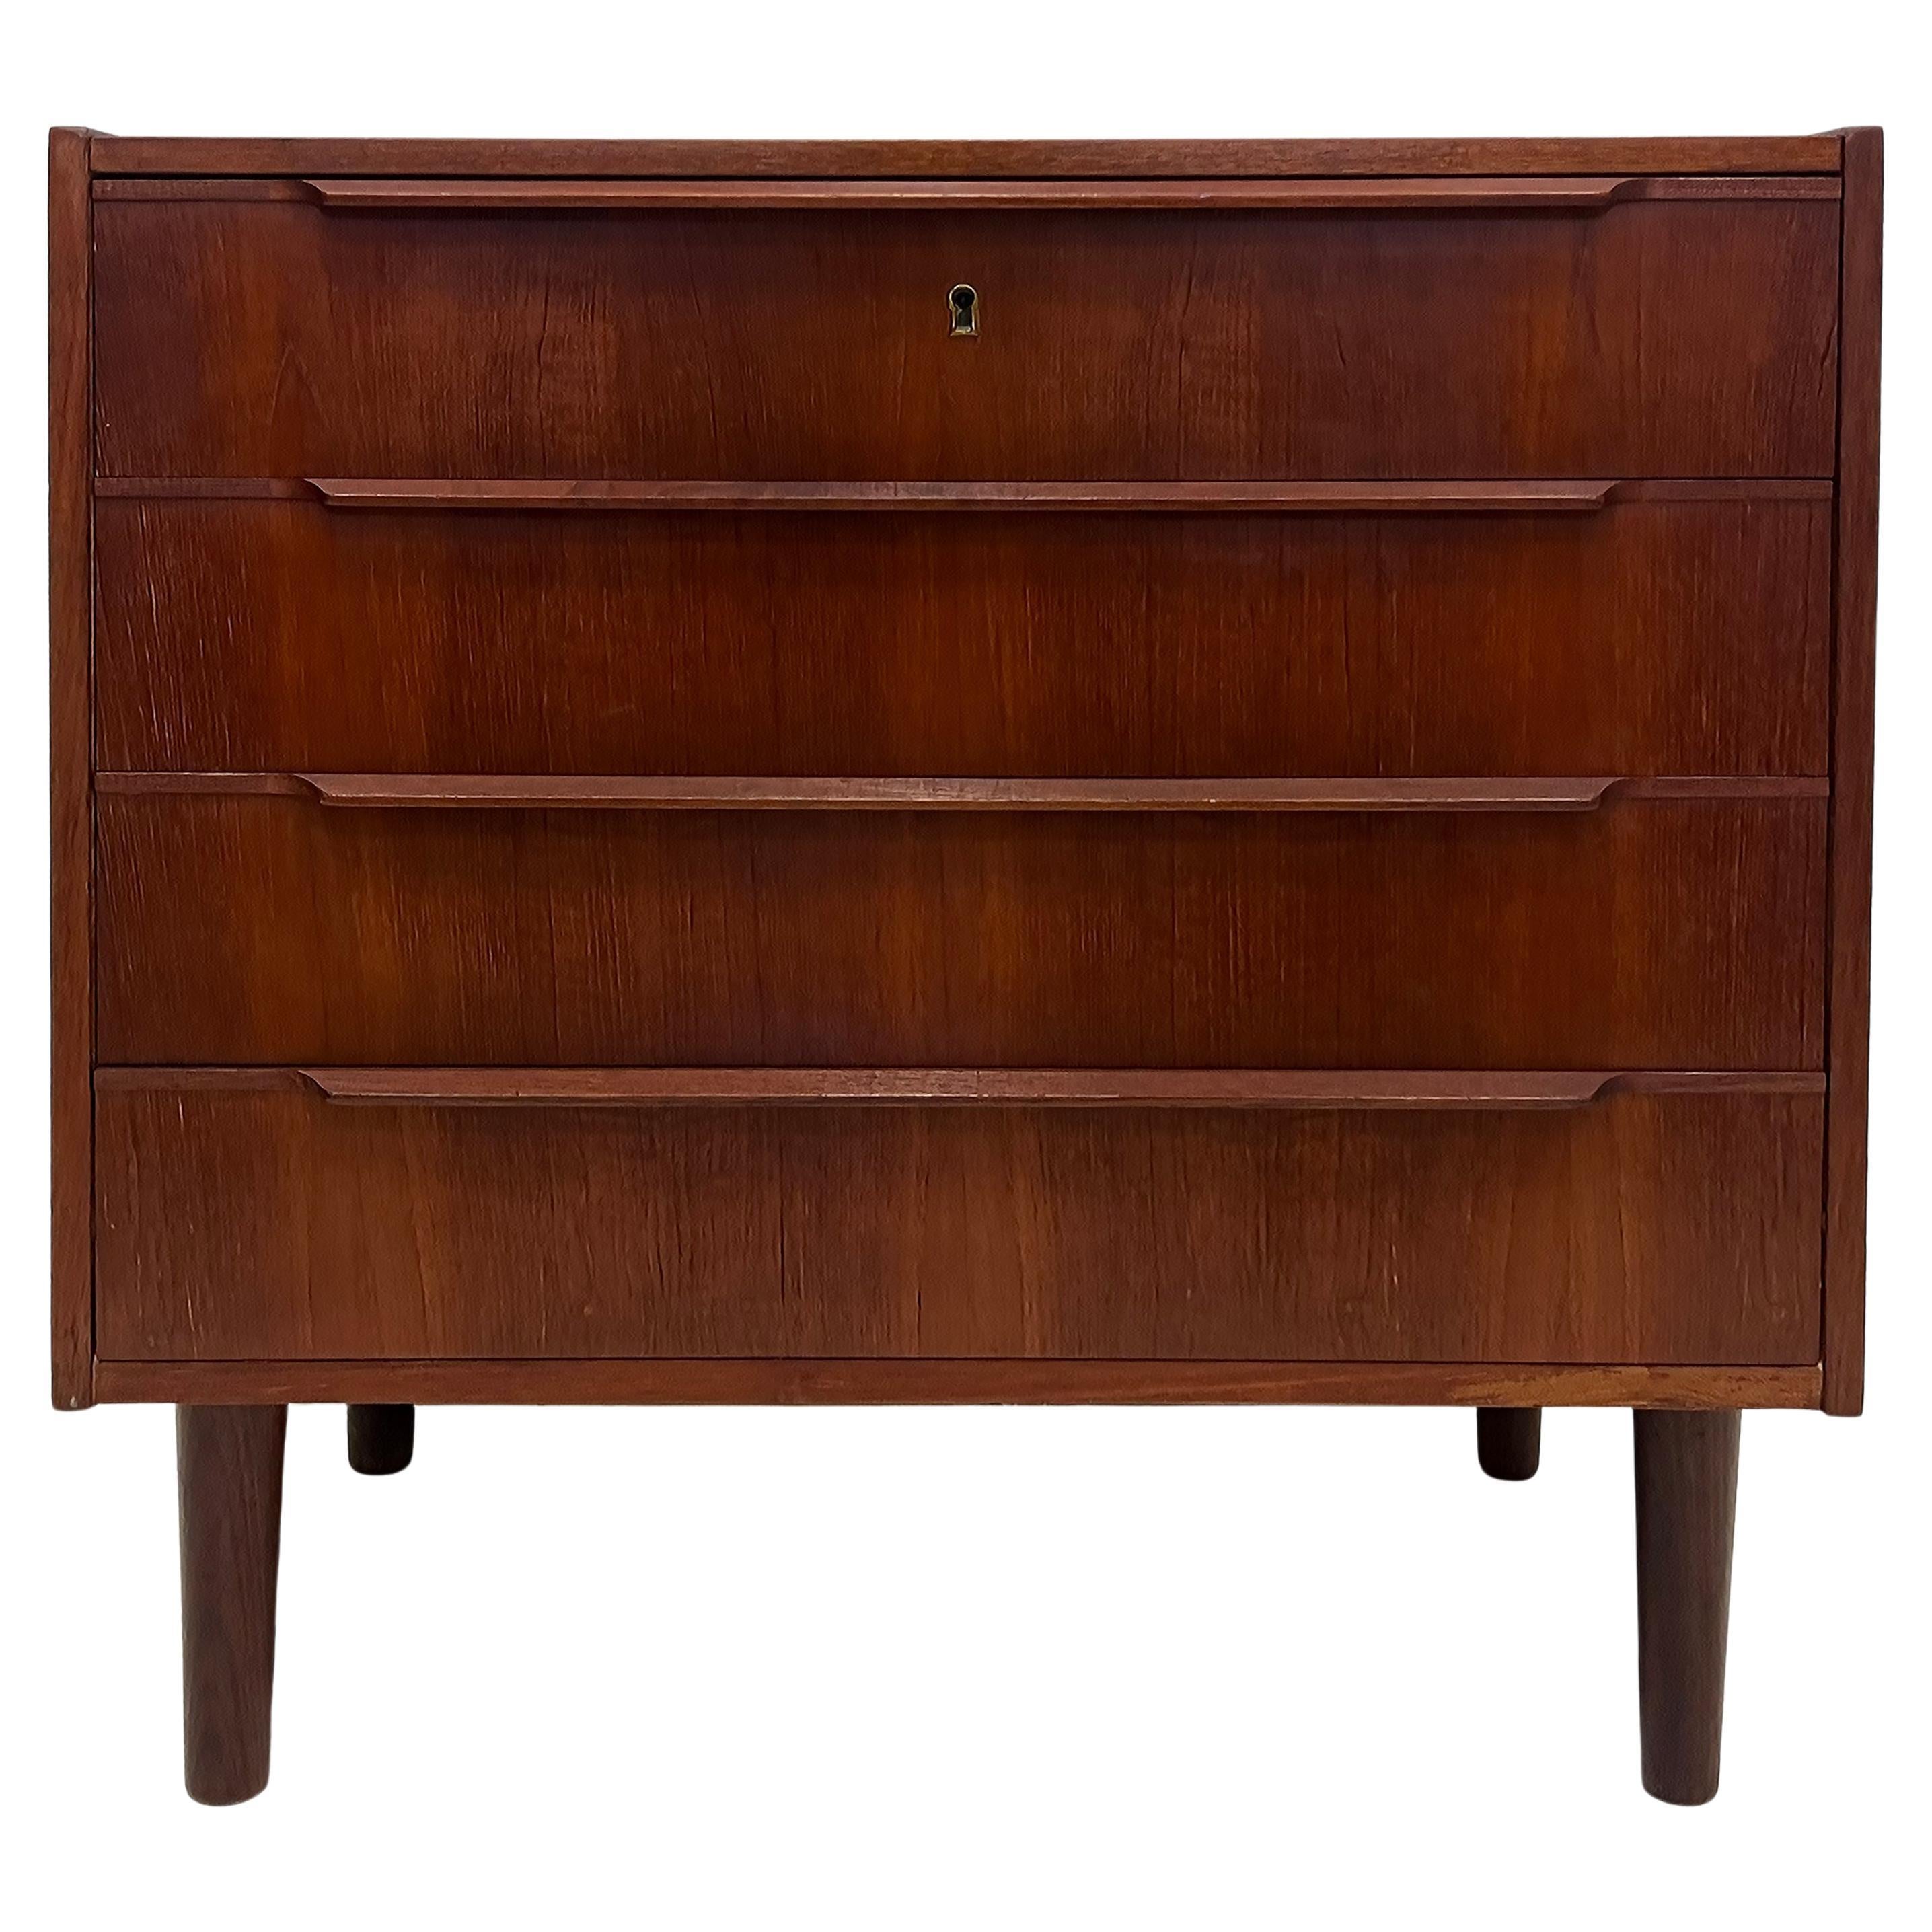 1950s Vintage Danish Modern Teak Cabinet with Lock and 4 Drawers